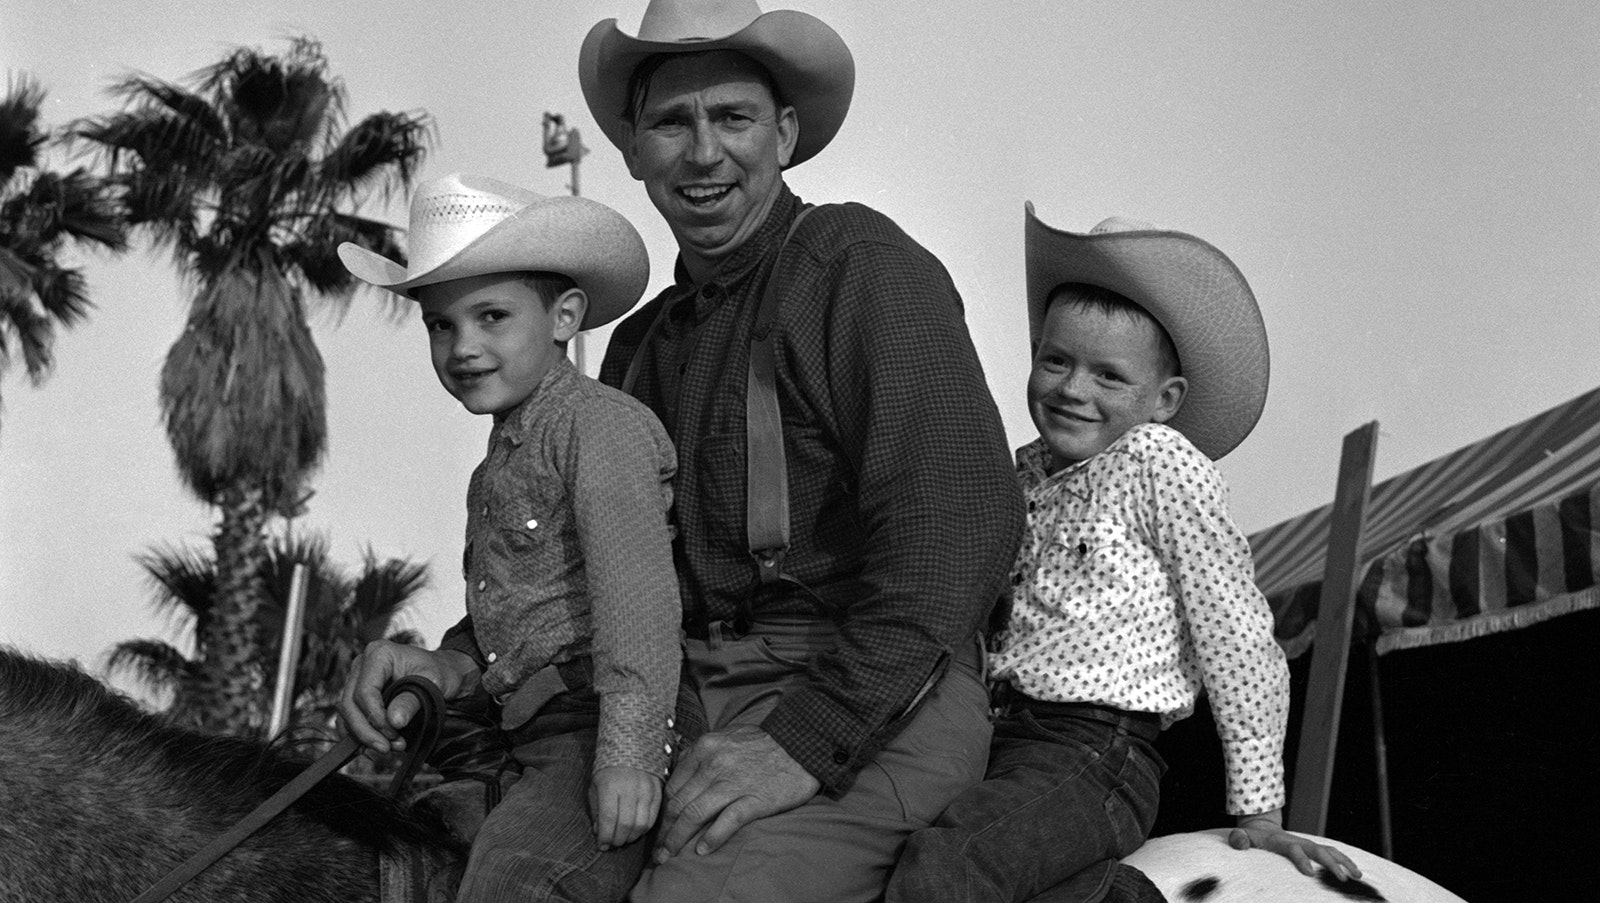 American actor Slim Pickens (born Louis Lindley, 1919-1983) as he sits, along with two unidentified boys, on an Appaloosa horse in the 1950s.